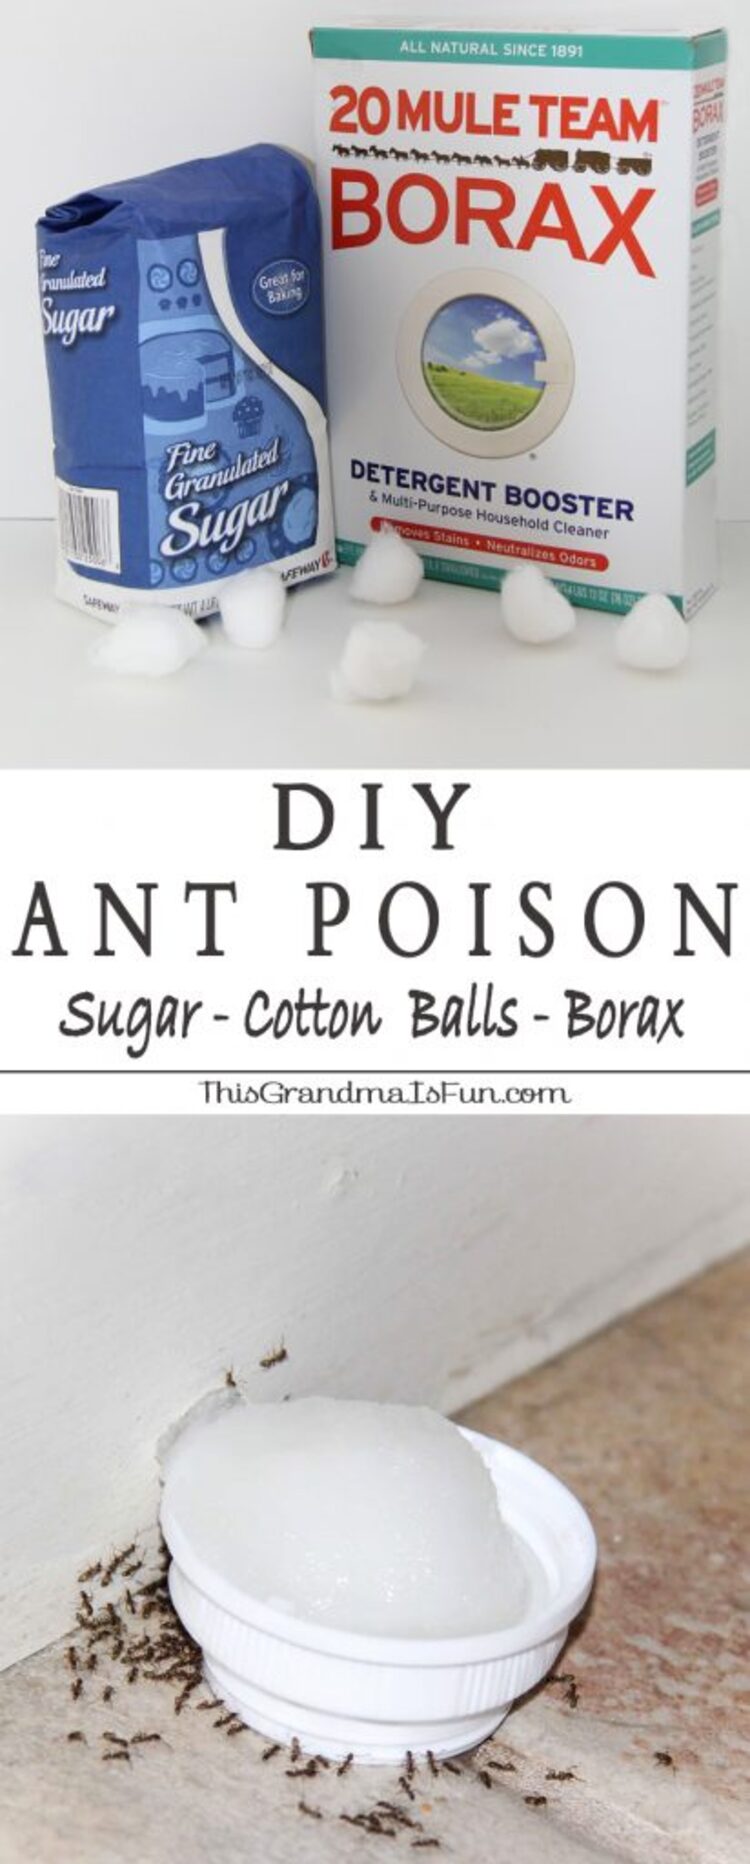 1 Poison Ant DIY Collage Image Box Of Borax Next To Bog Of Sugar Bowl Of Homemade Ant Killer Surrounded By Ants 